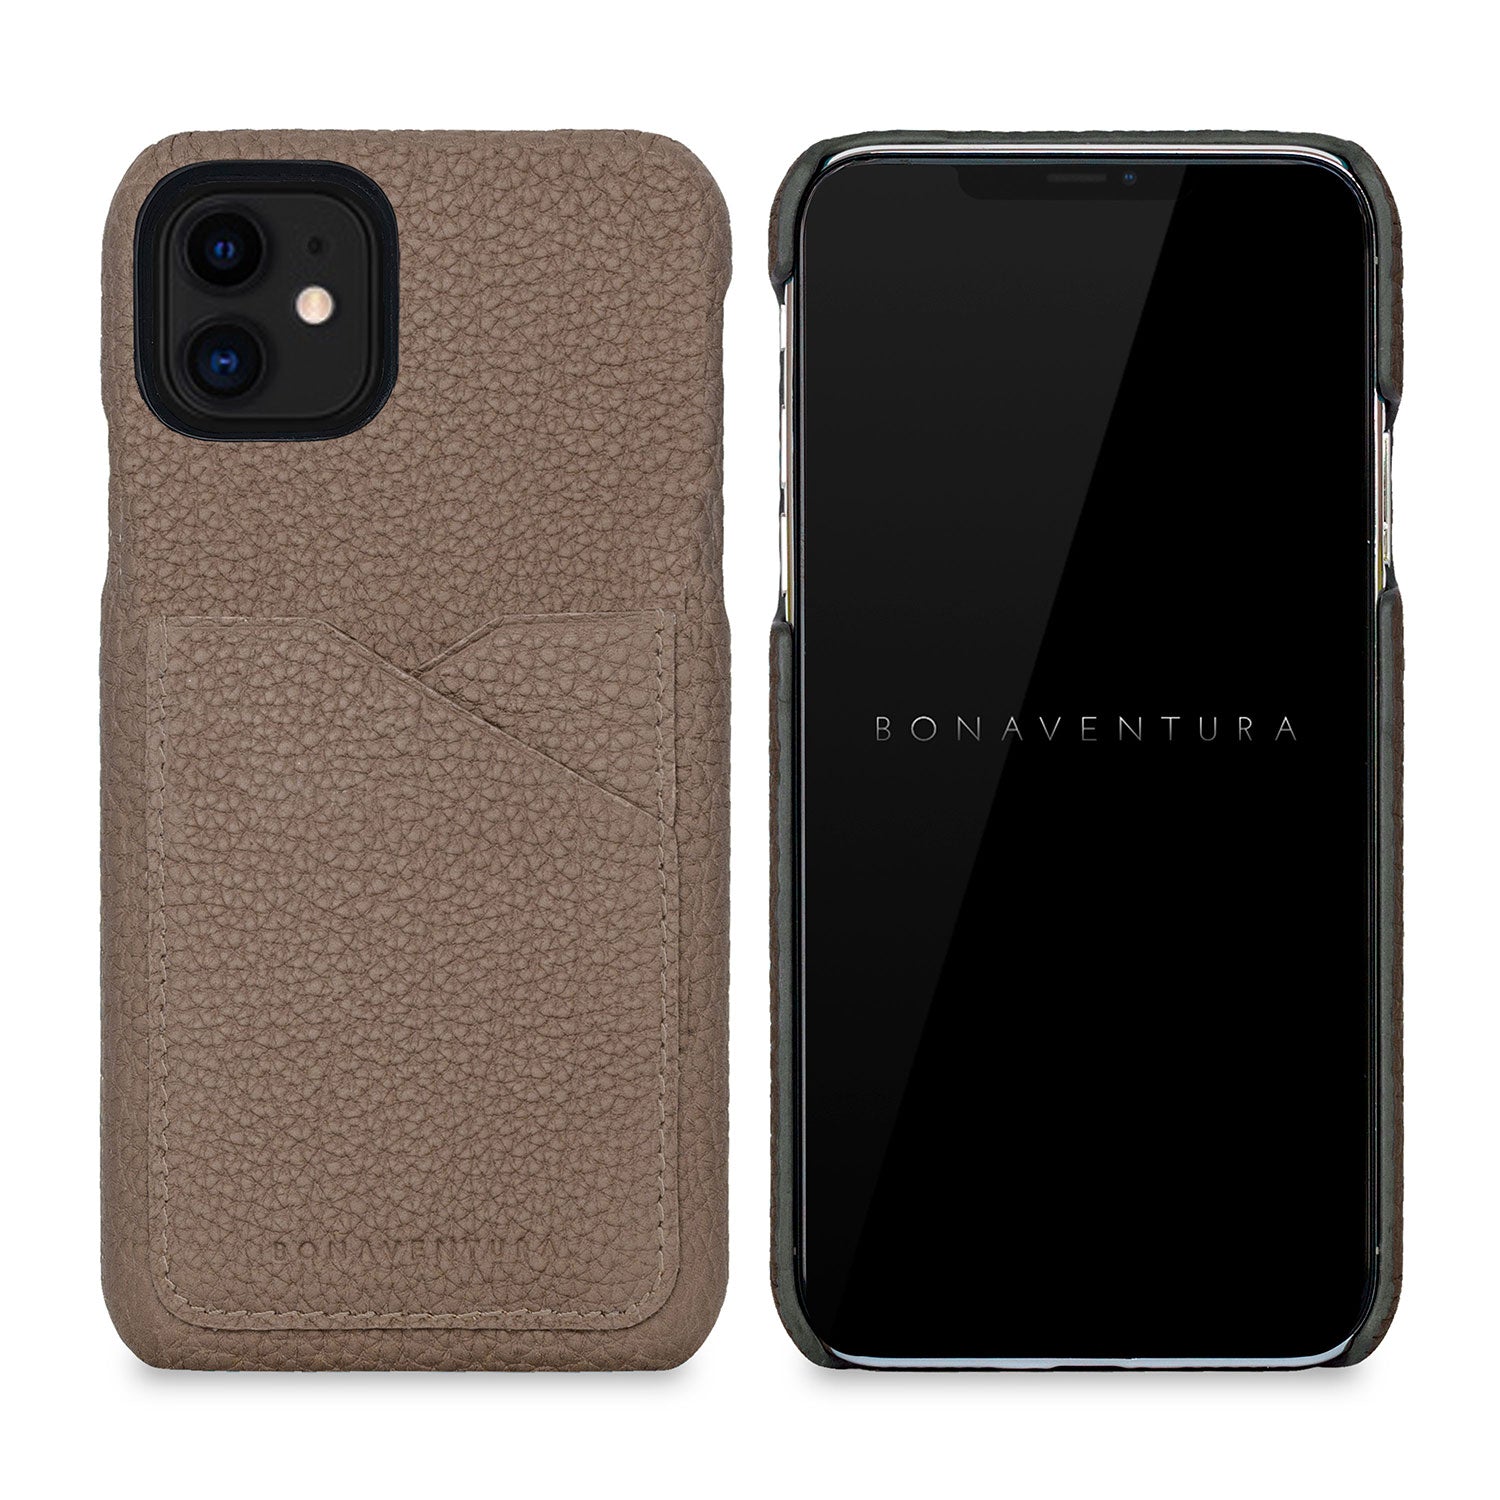 (iPhone 11) Back cover case Shrink leather